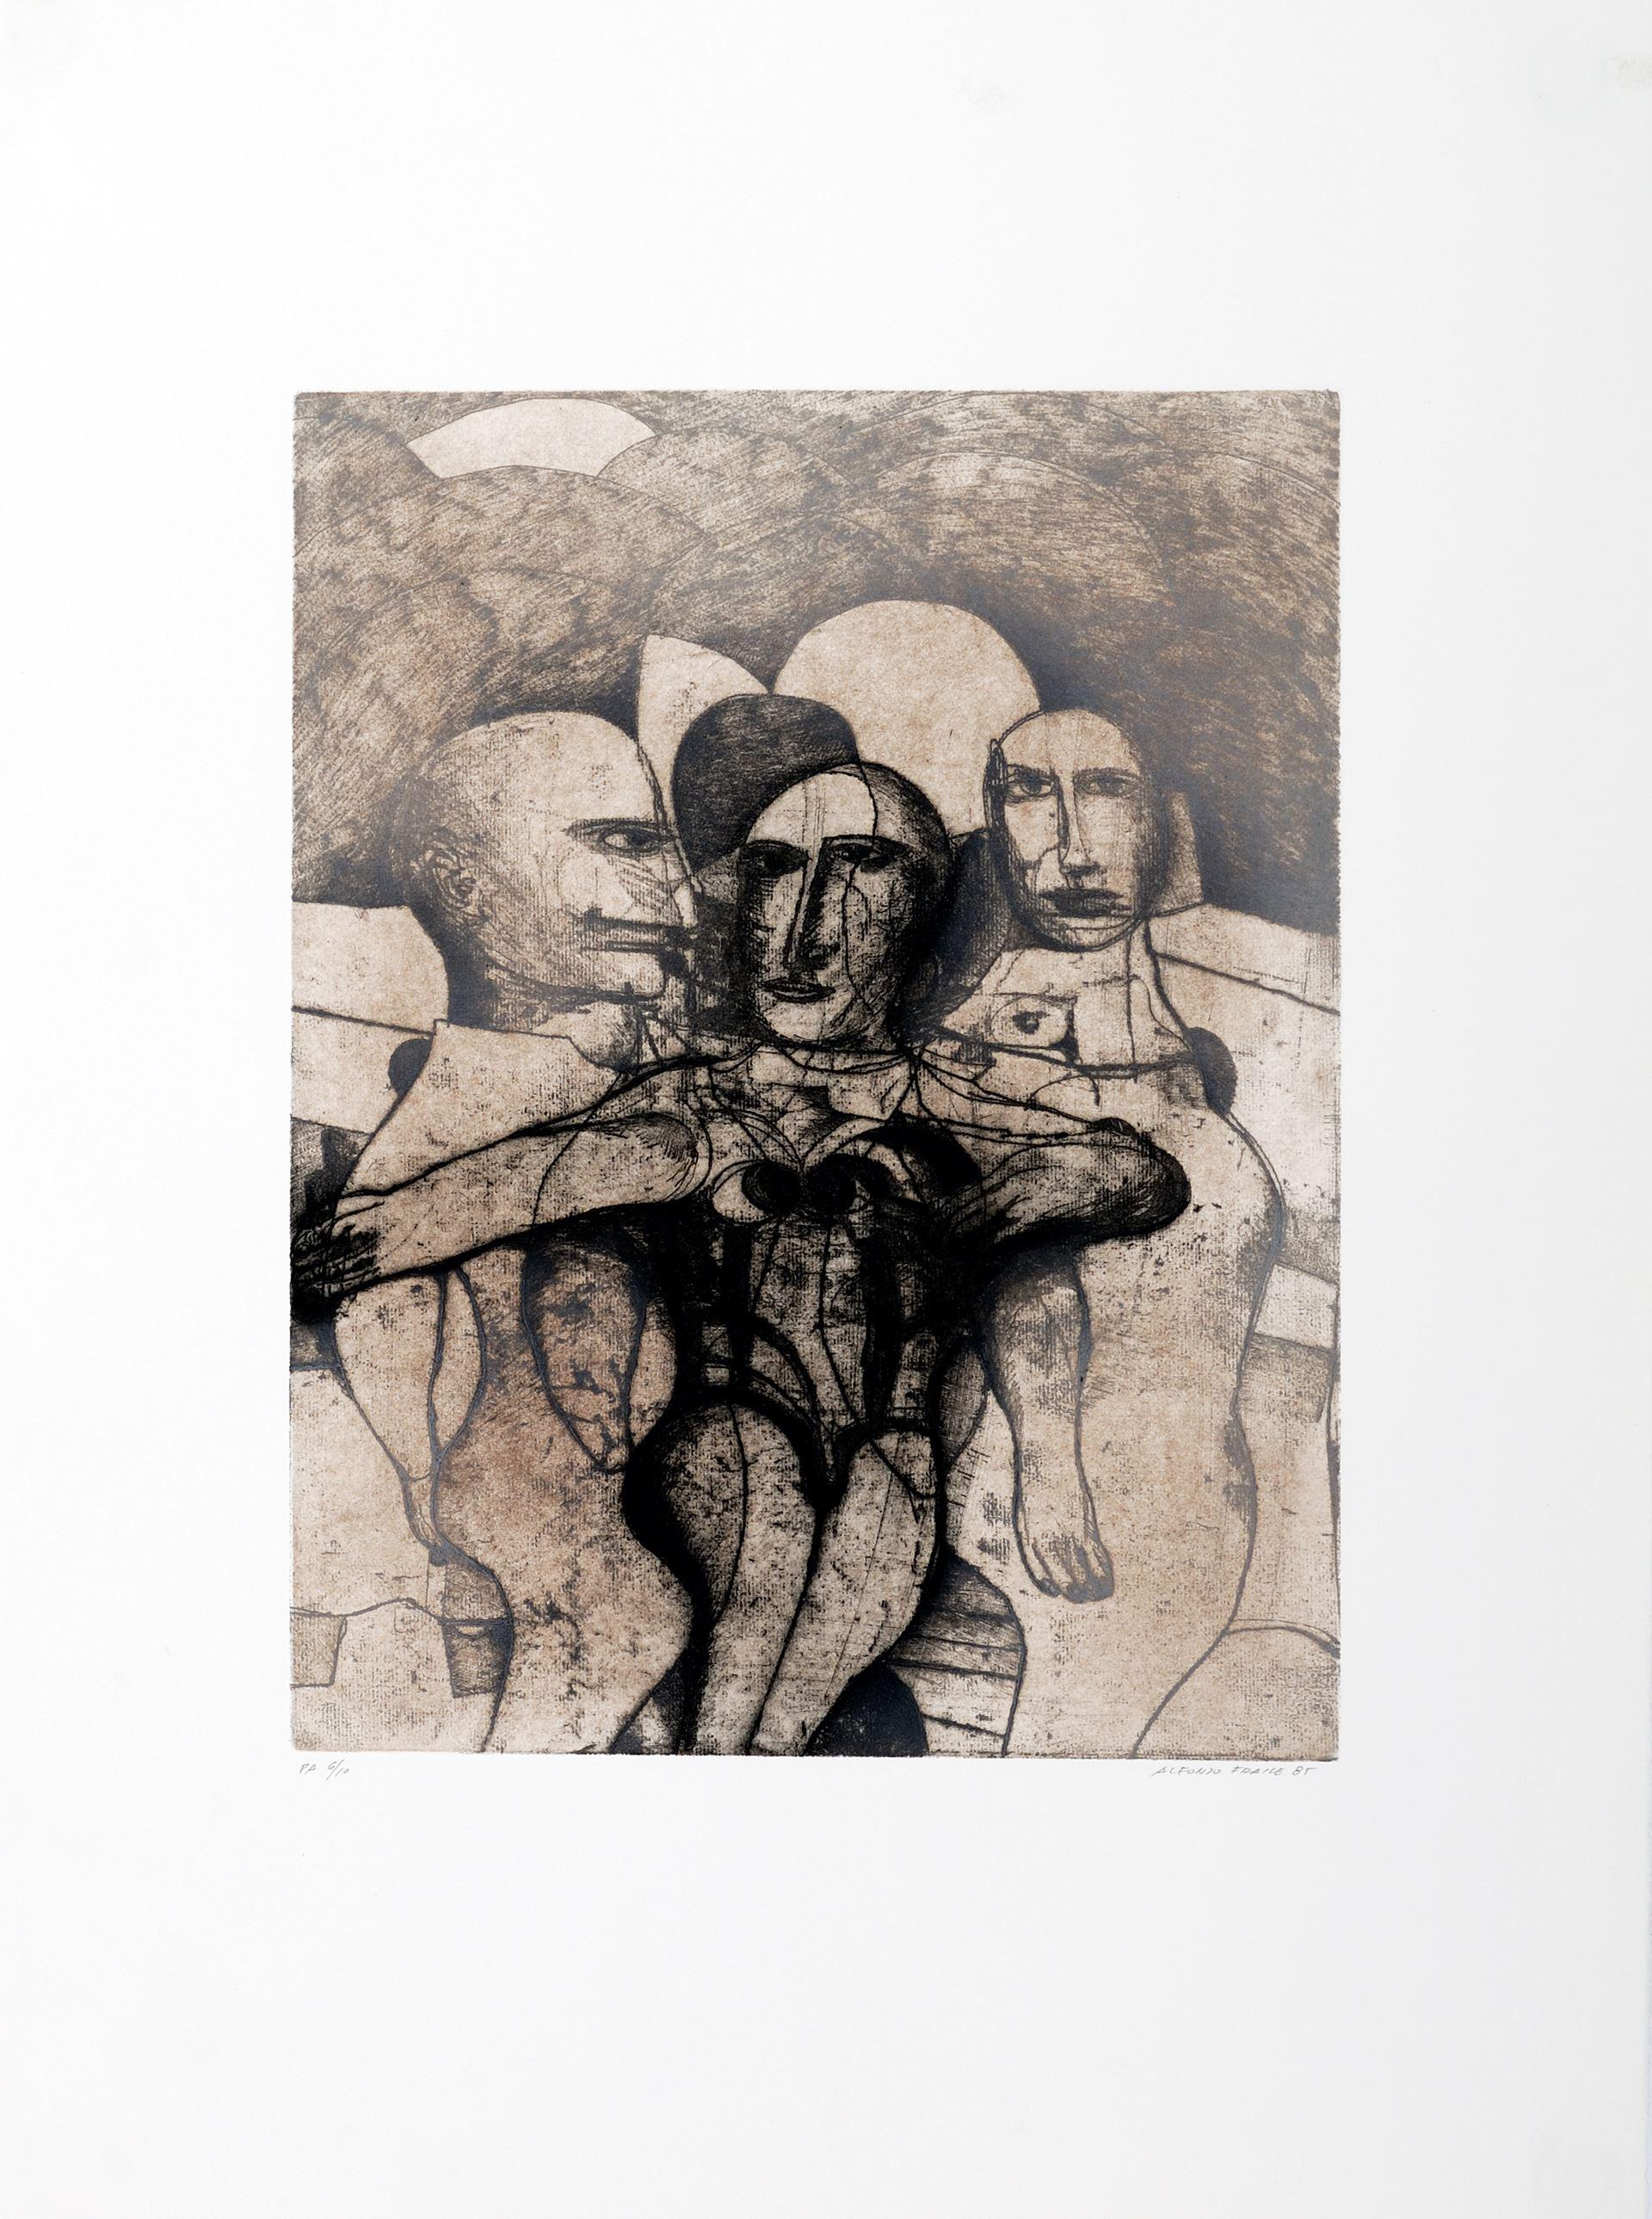 Alfonso Fraile (Spain, 1930-1988)
'Hombres', 1985
engraving on paper
18.2 x 13.8 in. (46 x 35 cm.)
Edition of 10
ID: FRA1262-002-010
Hand-signed by author
_____________________________________________
Alfonso Fraile was a Spanish painter. He was